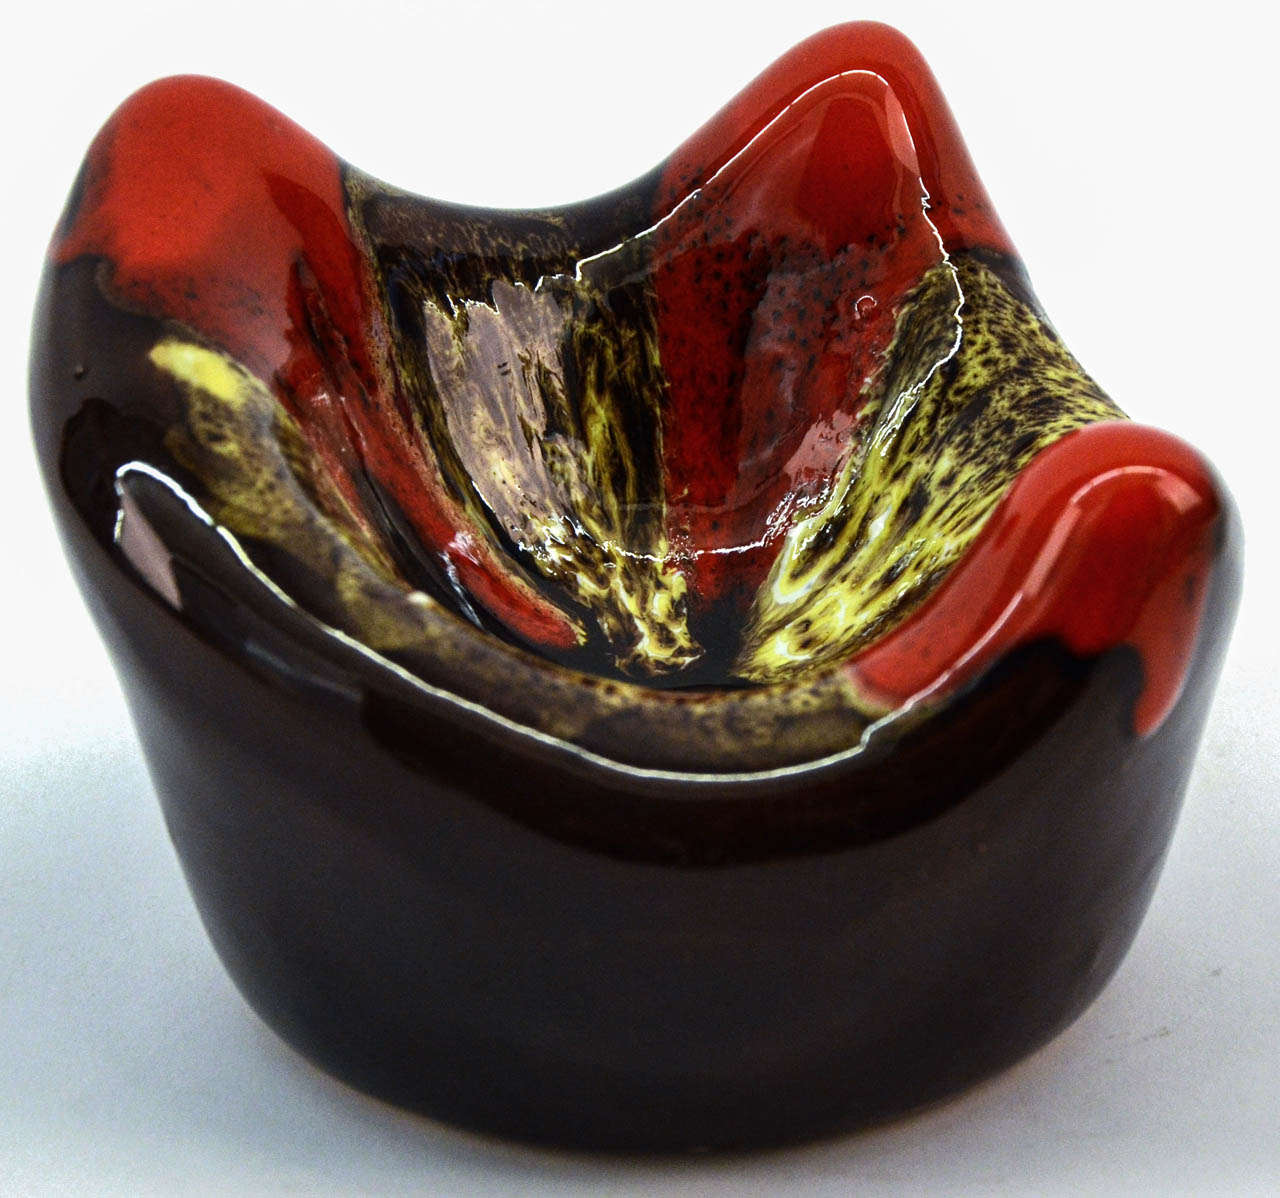 A fine example of colourful pottery ceramic ashtray from the French ceramic manufacturer Vallauris.
